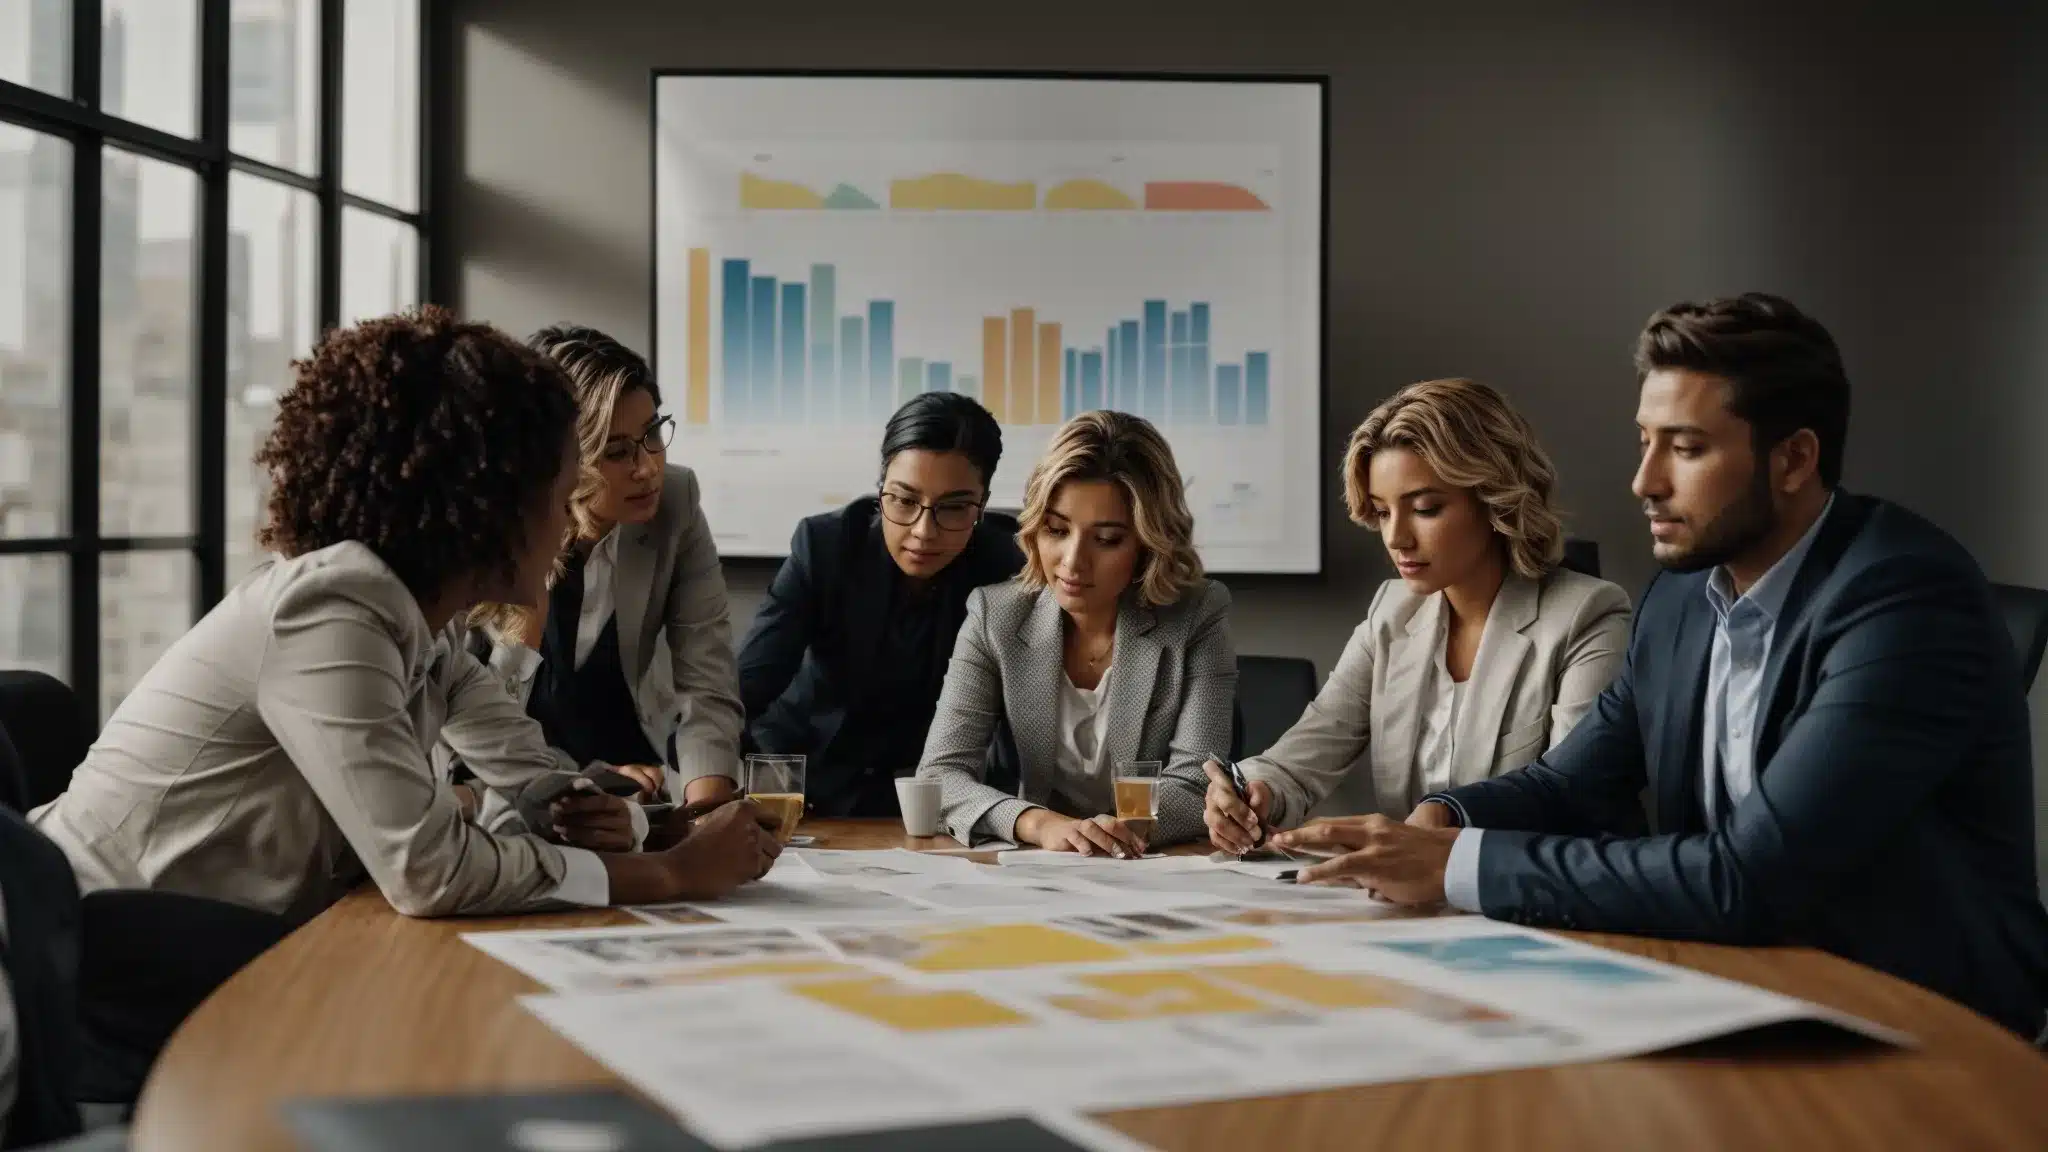 A Group Of Marketing Professionals Gathers Around A Conference Table, Discussing A Poster With Graphs Mapping Brand Strategies And Customer Value Propositions.